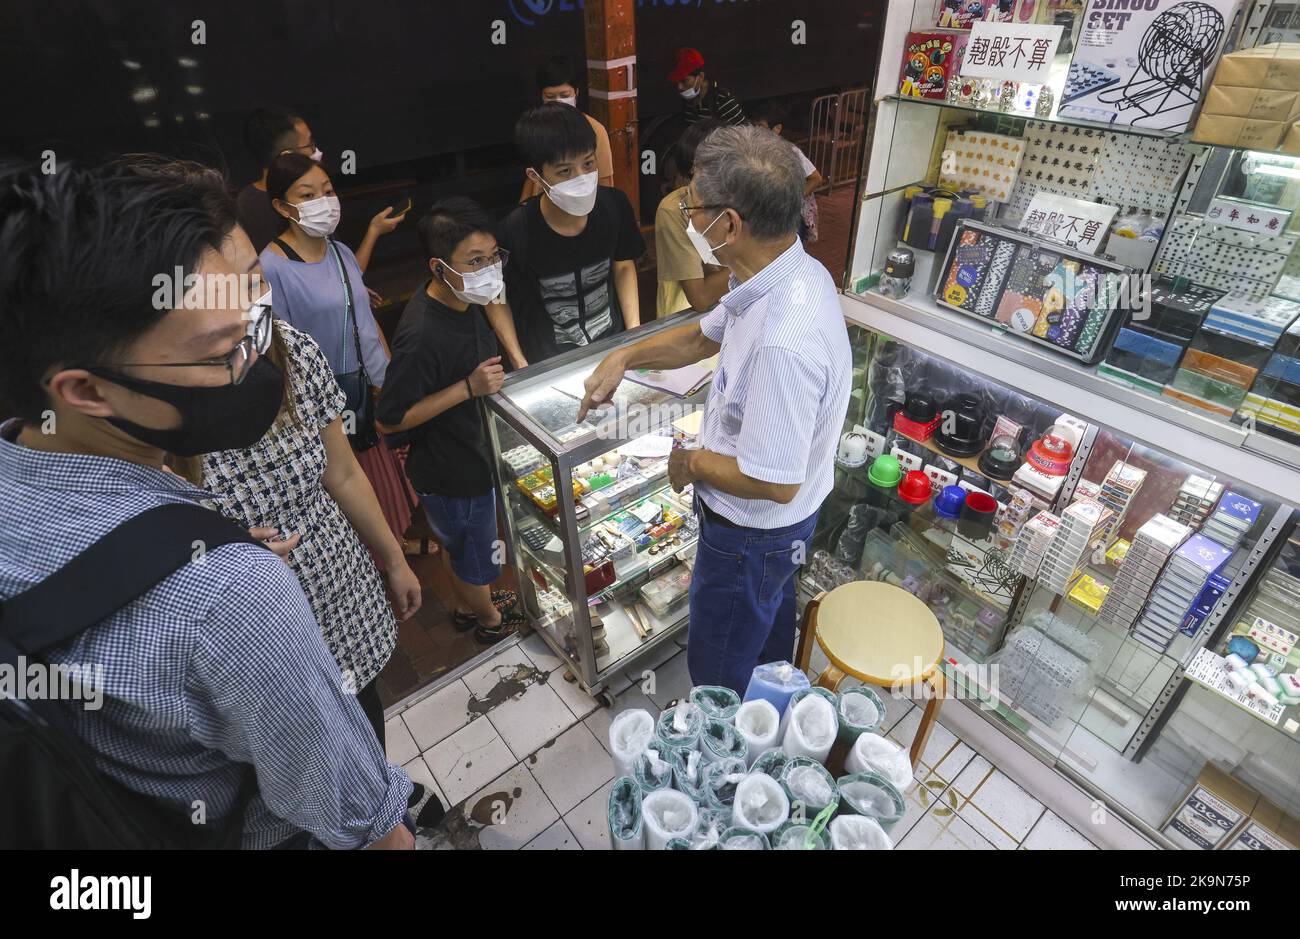 Cheung Shun-king, Mahjong tile artisan and owner of Biu Kee Mah-Jong, serves customers at Biu Kee Mah-Jong in Jordan. The old mahjong tile shop is forced to close at the end of October as it is evicted by the Buildings Department.  06OCT22 SCMP/ Edmond So Stock Photo